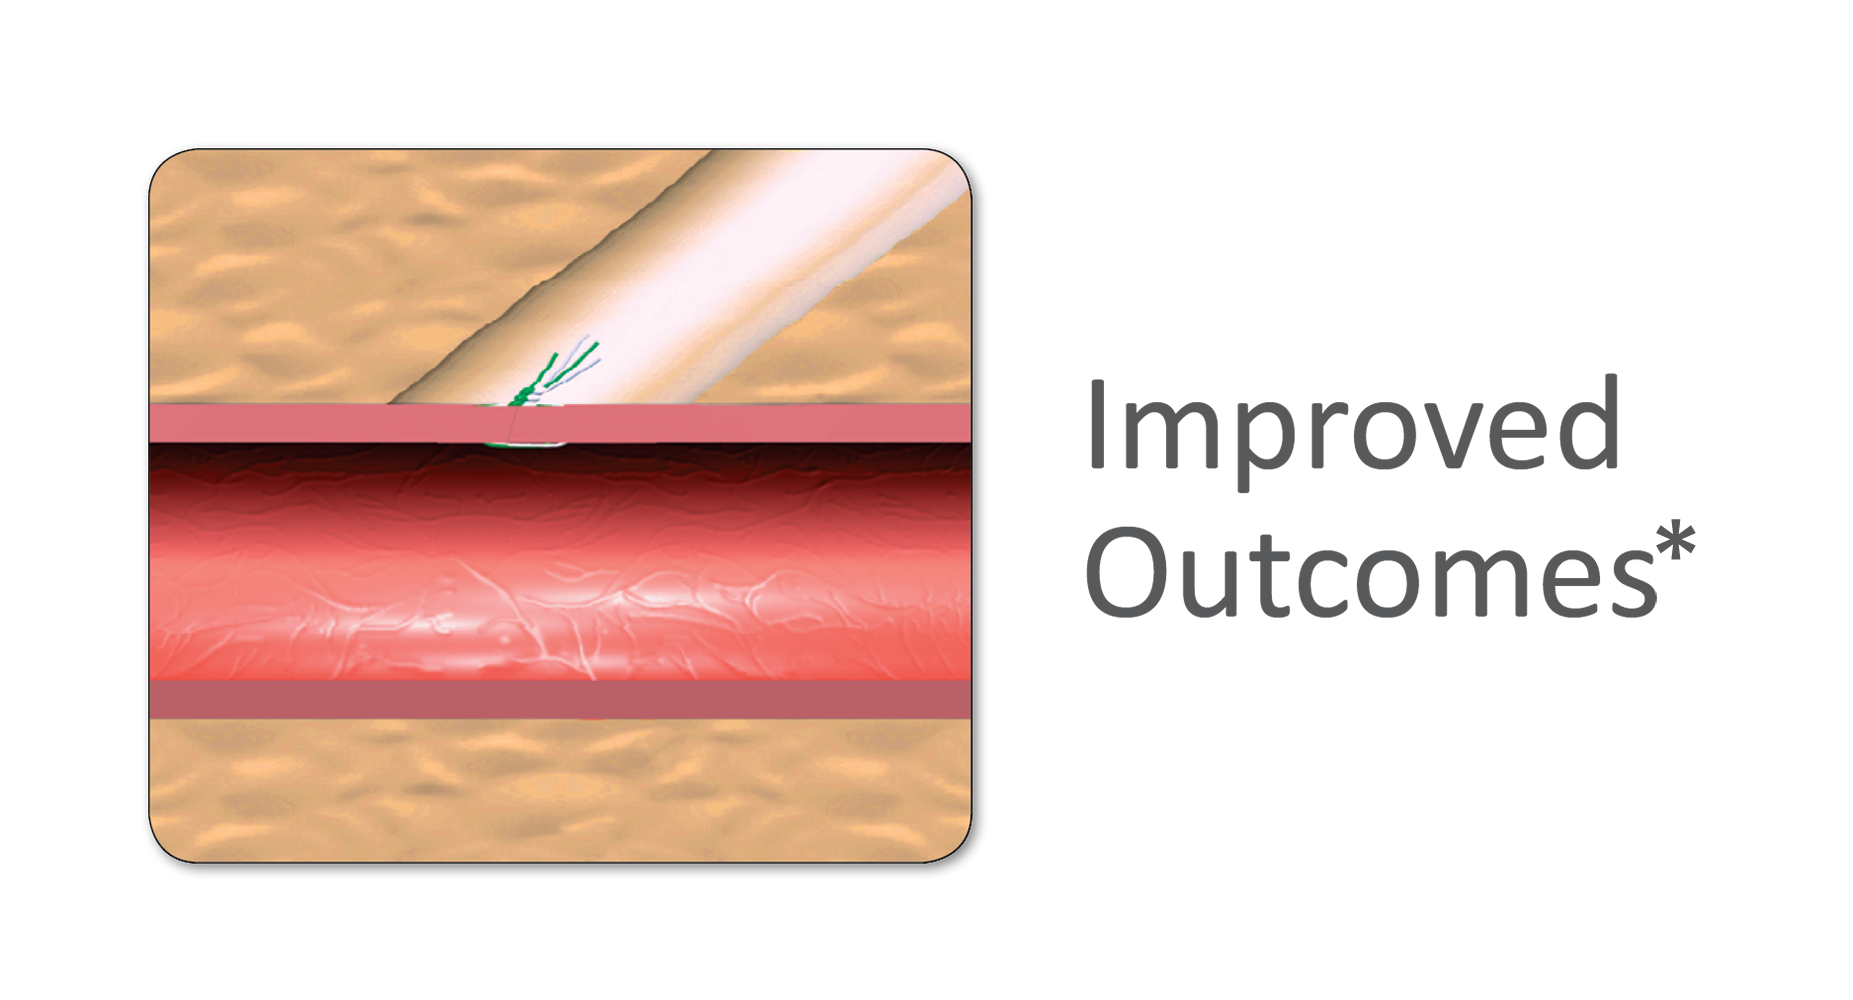 Prostar Improved Outcomes